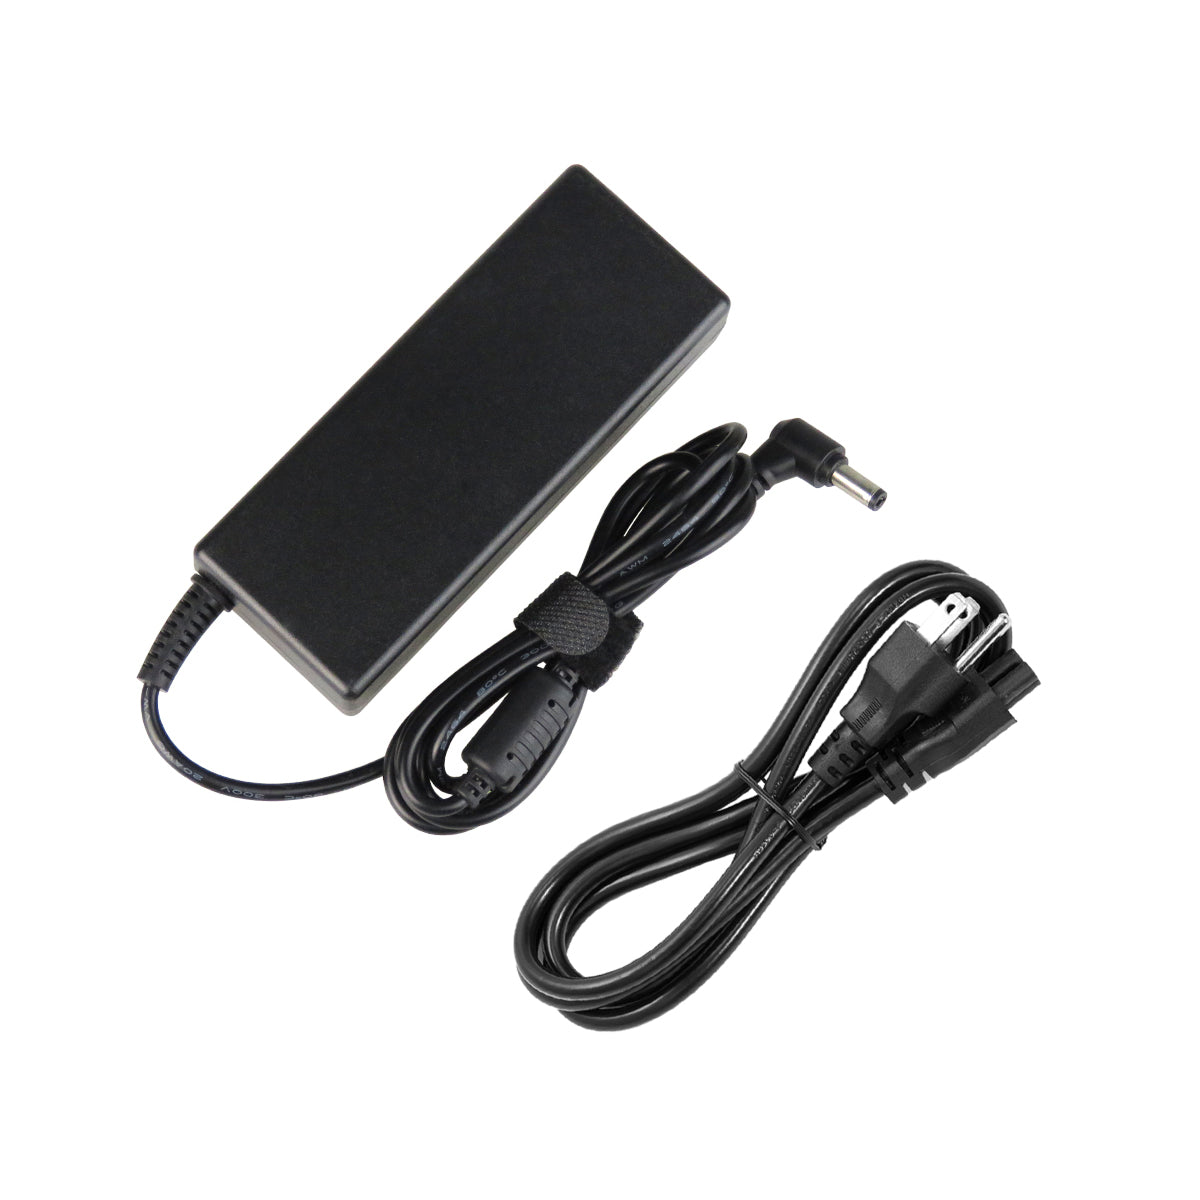 AC Adapter Charger for ASUS X70 Series Notebook.